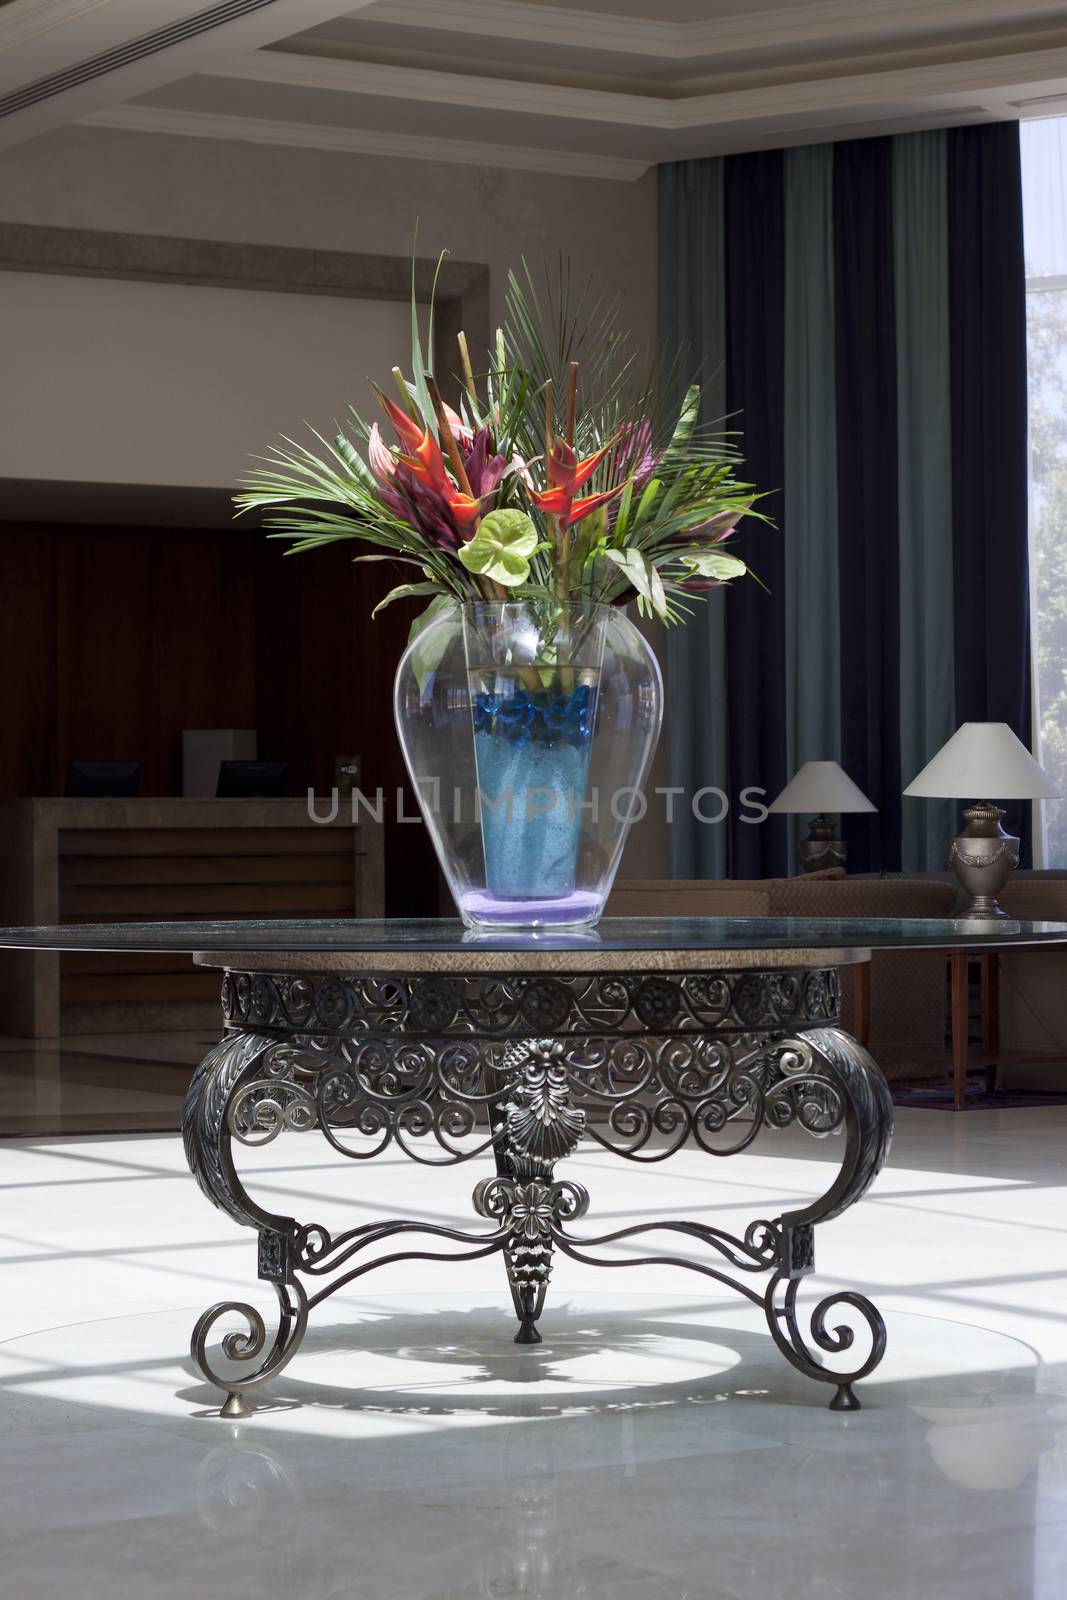 Reception area with vase set up with a lavish bouquet of flowers